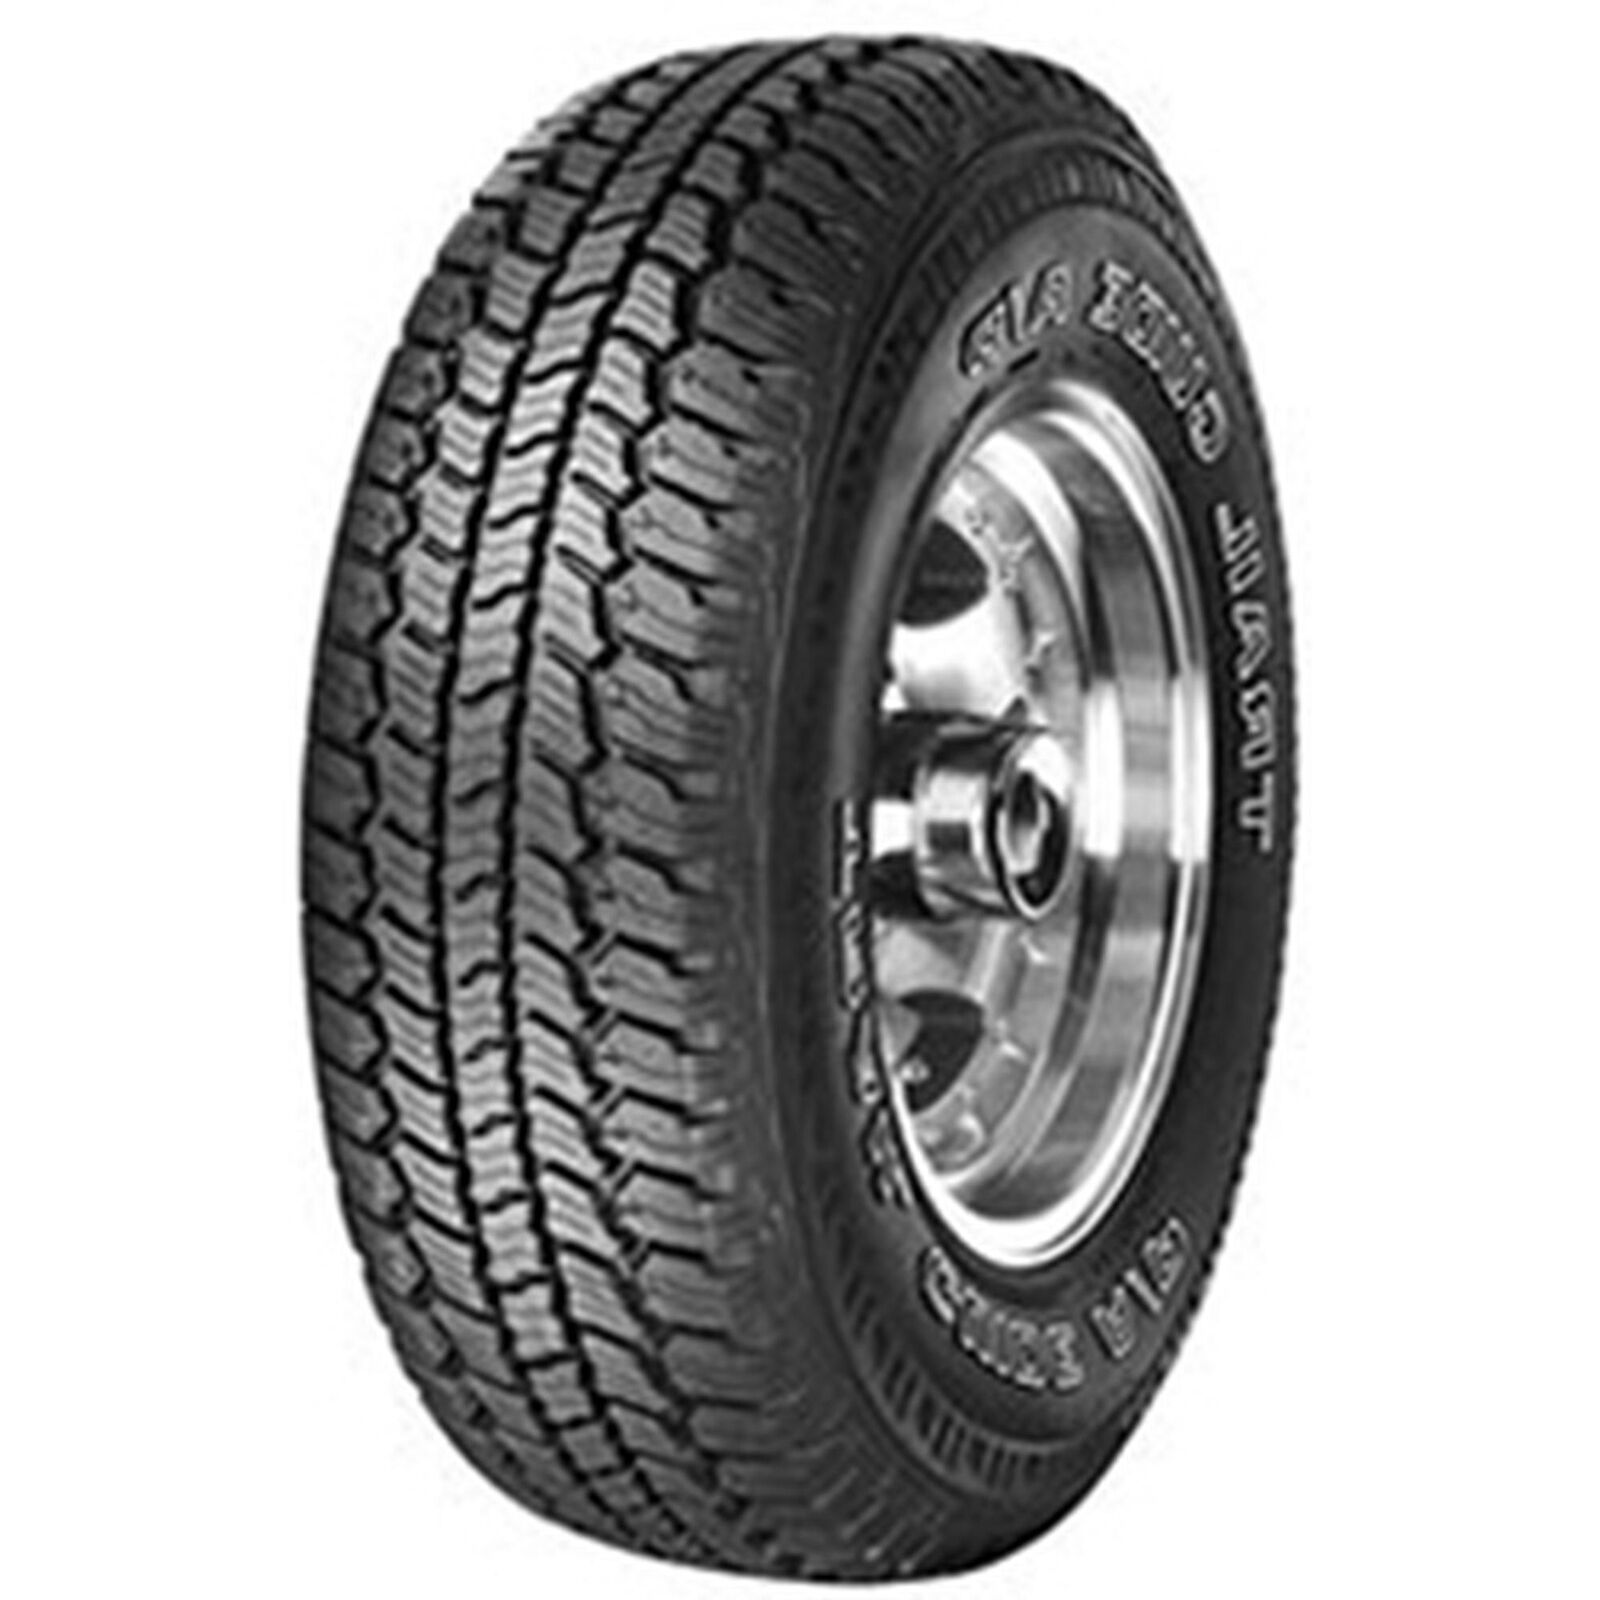 4 New Sigma Trail Guide A/t  - P245x75r16 Tires 2457516 245 75 16